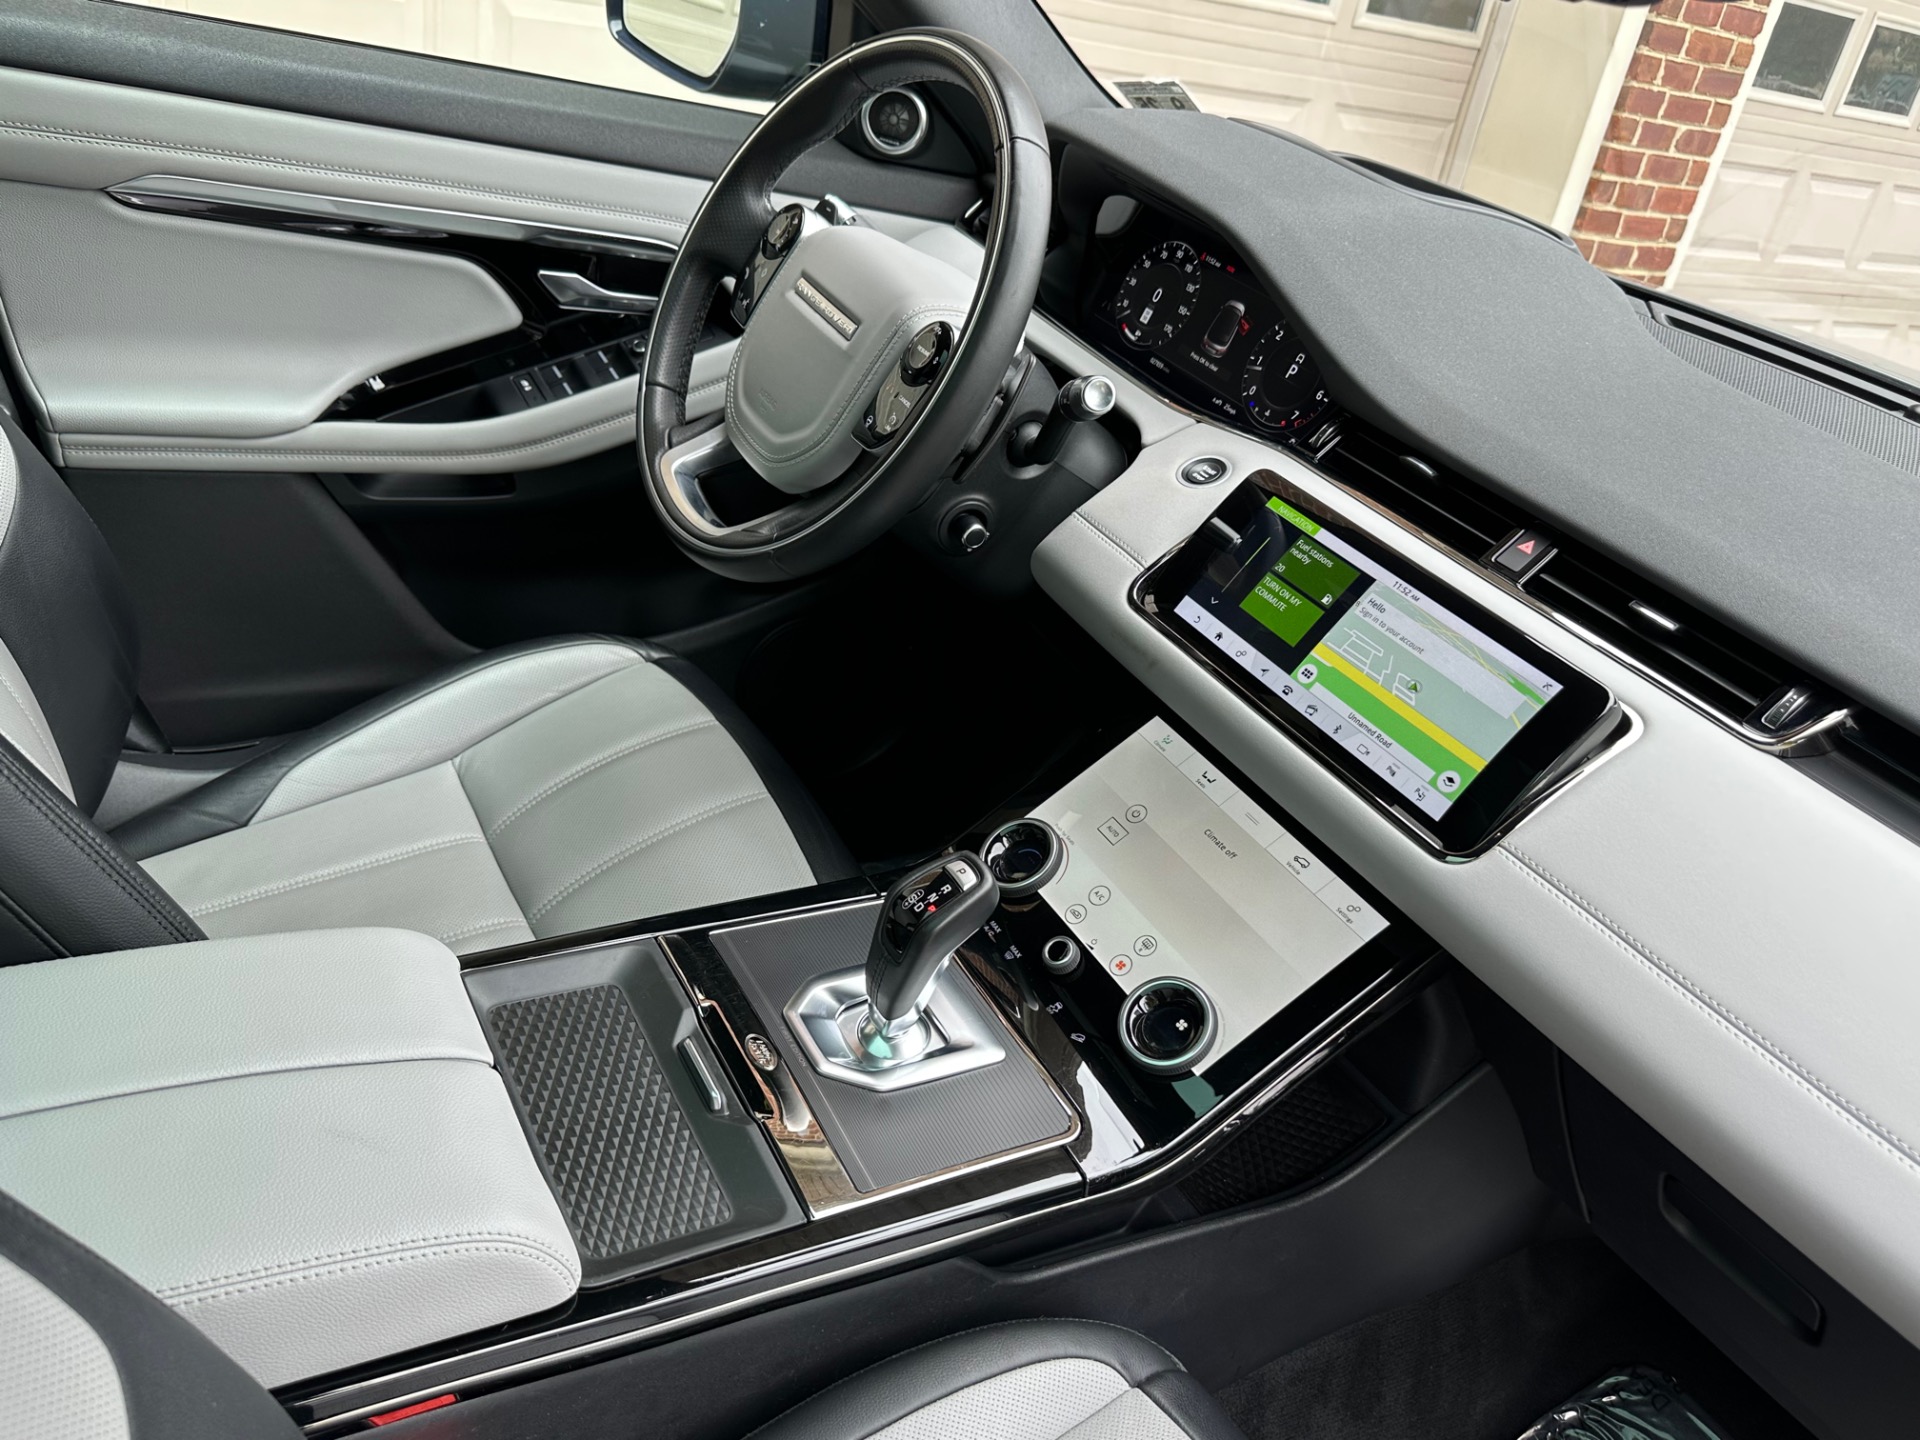 Used-2020-Land-Rover-Range-Rover-Evoque-First-Edition